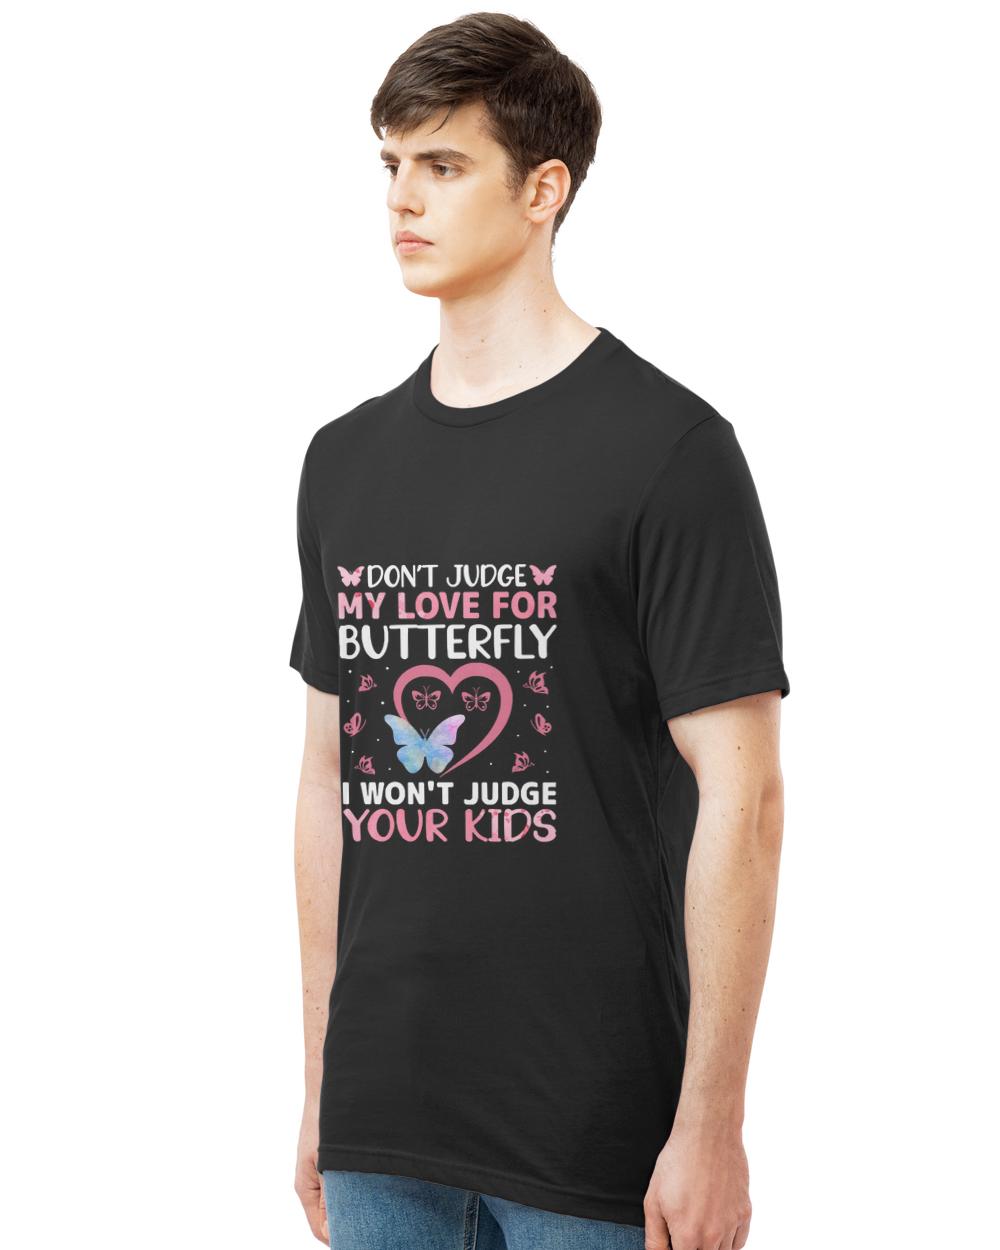 Butterfly Lover Gifts T- Shirt Don't Judge My Love for Butterfly I Won't Judge Your Kids T- Shirt